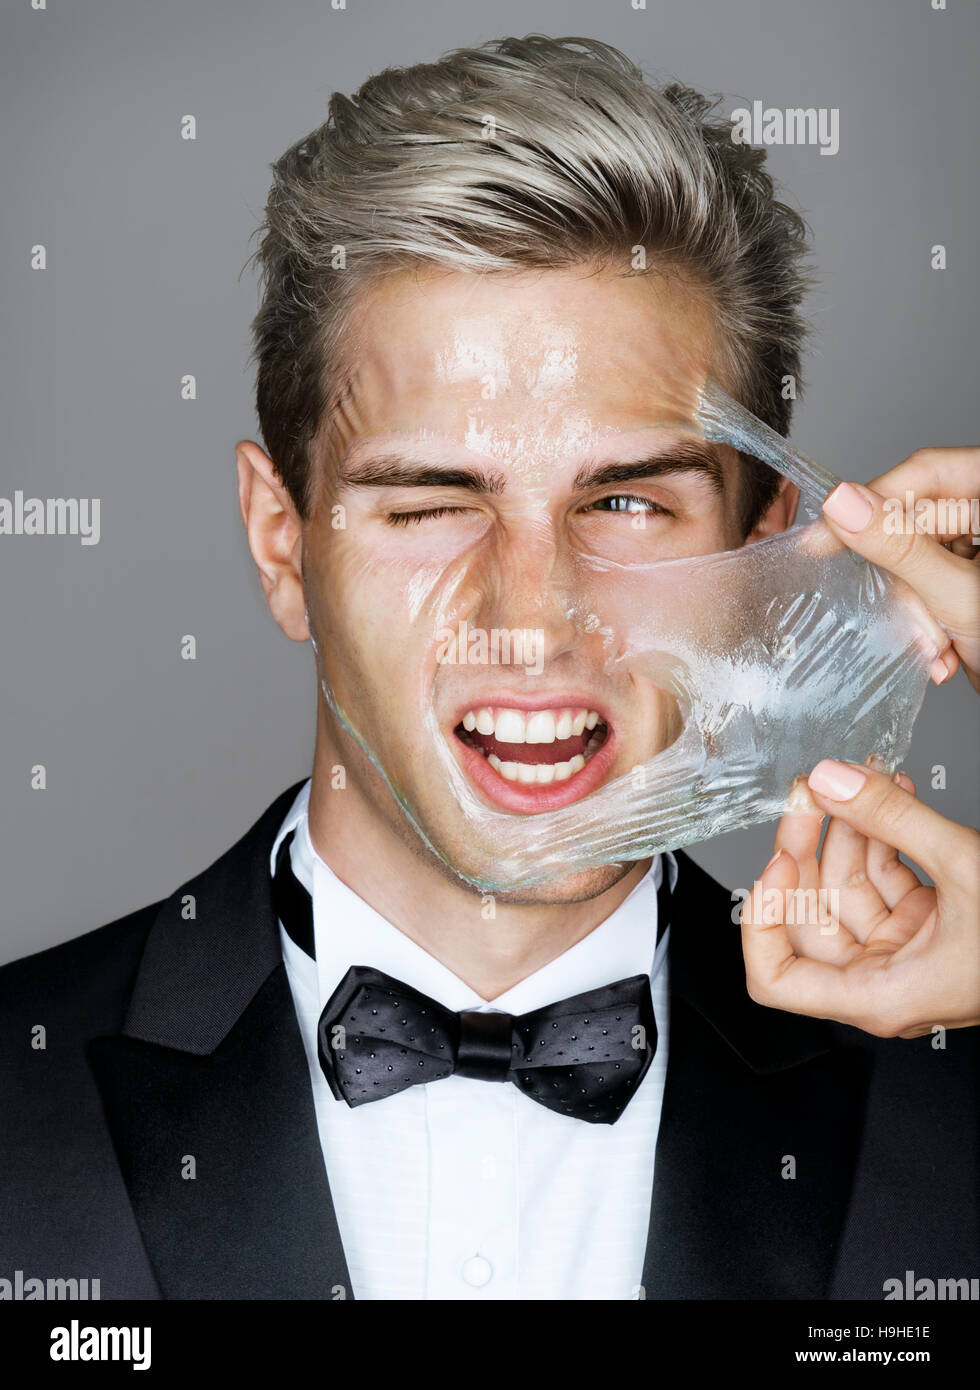 Pain. Elegant man in black suit removes peeling off a facial mask. Photo disaffected rich man on gray background. Skin care concept Stock Photo